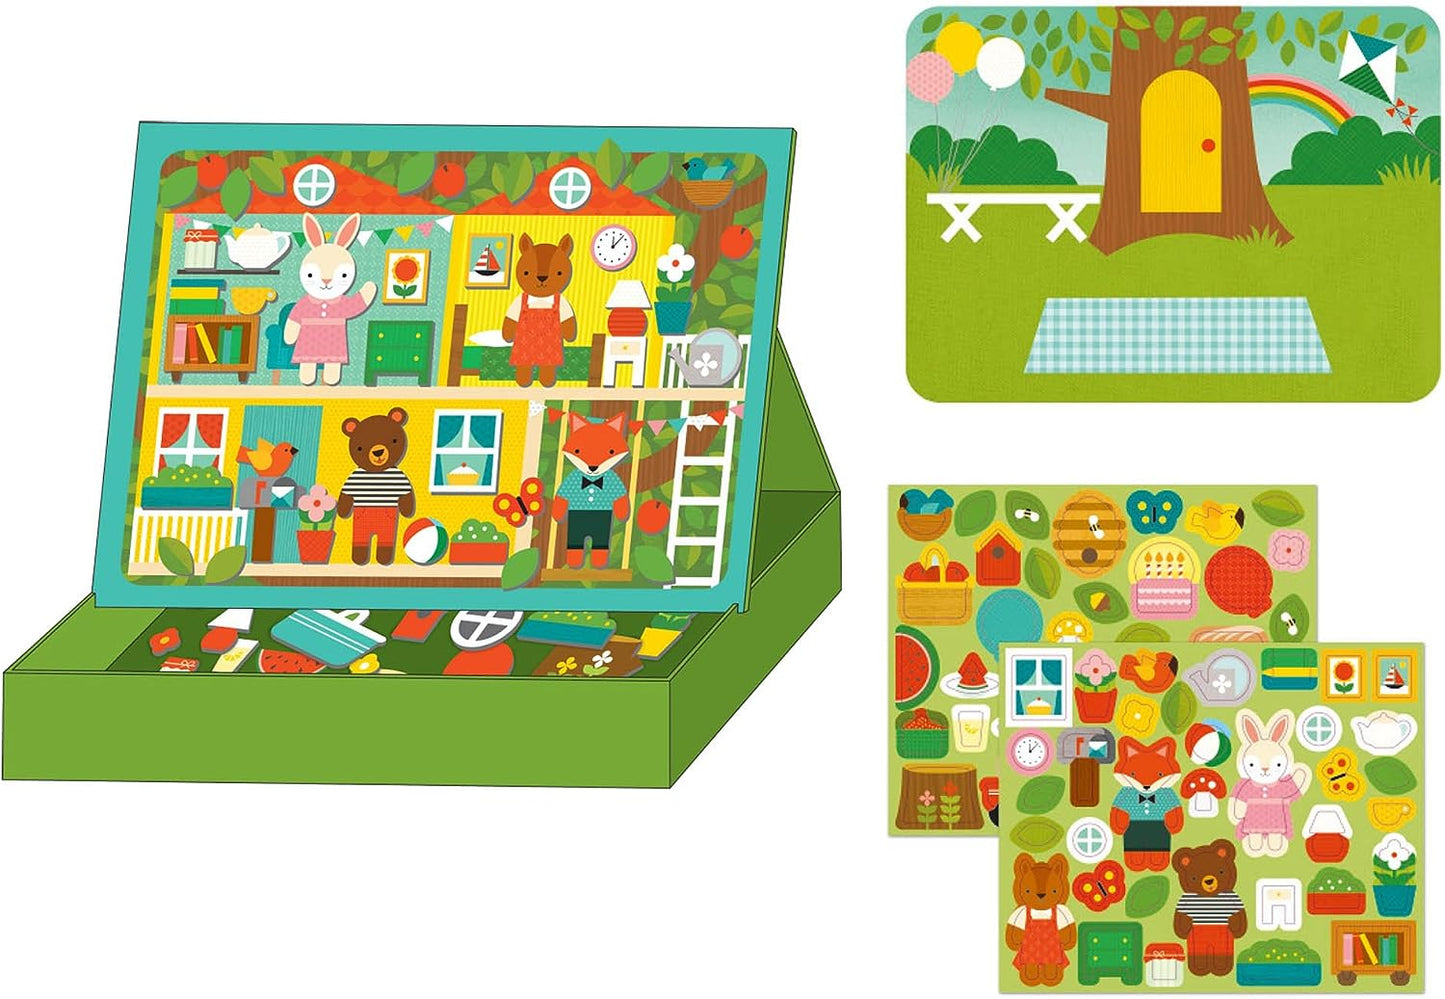 Magnetic Play Scene Treehouse Party